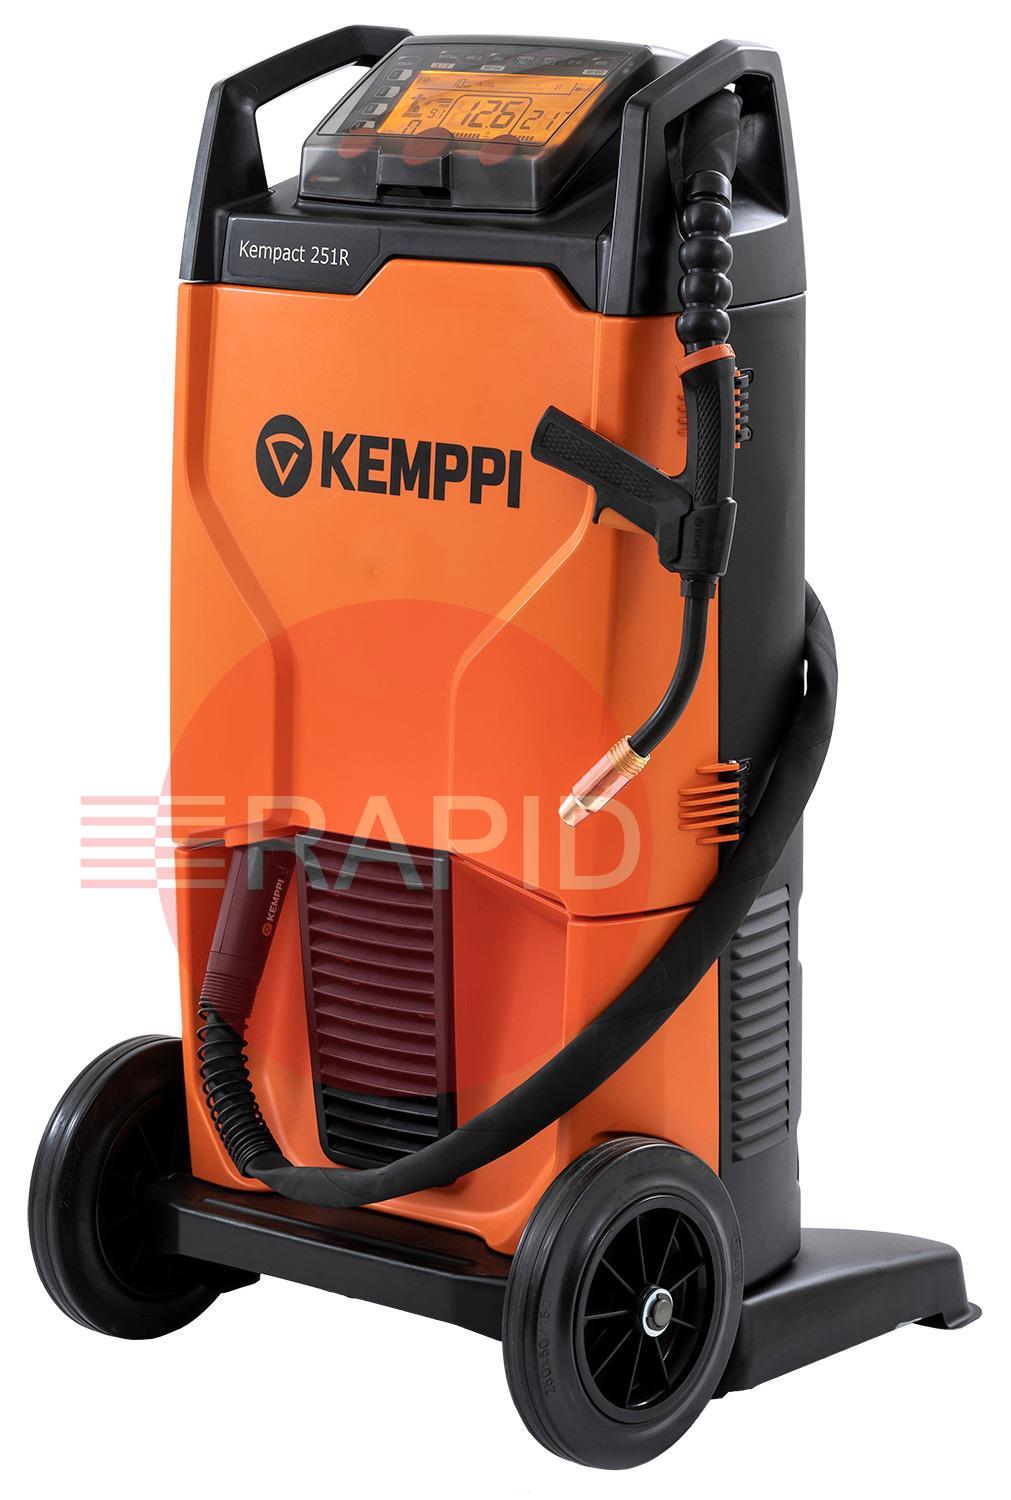 P2303GXE  Kemppi Kempact RA 251R, 250A 1 Phase 230v Mig Welder, with Flexlite GXe 305G 3.5m Torch